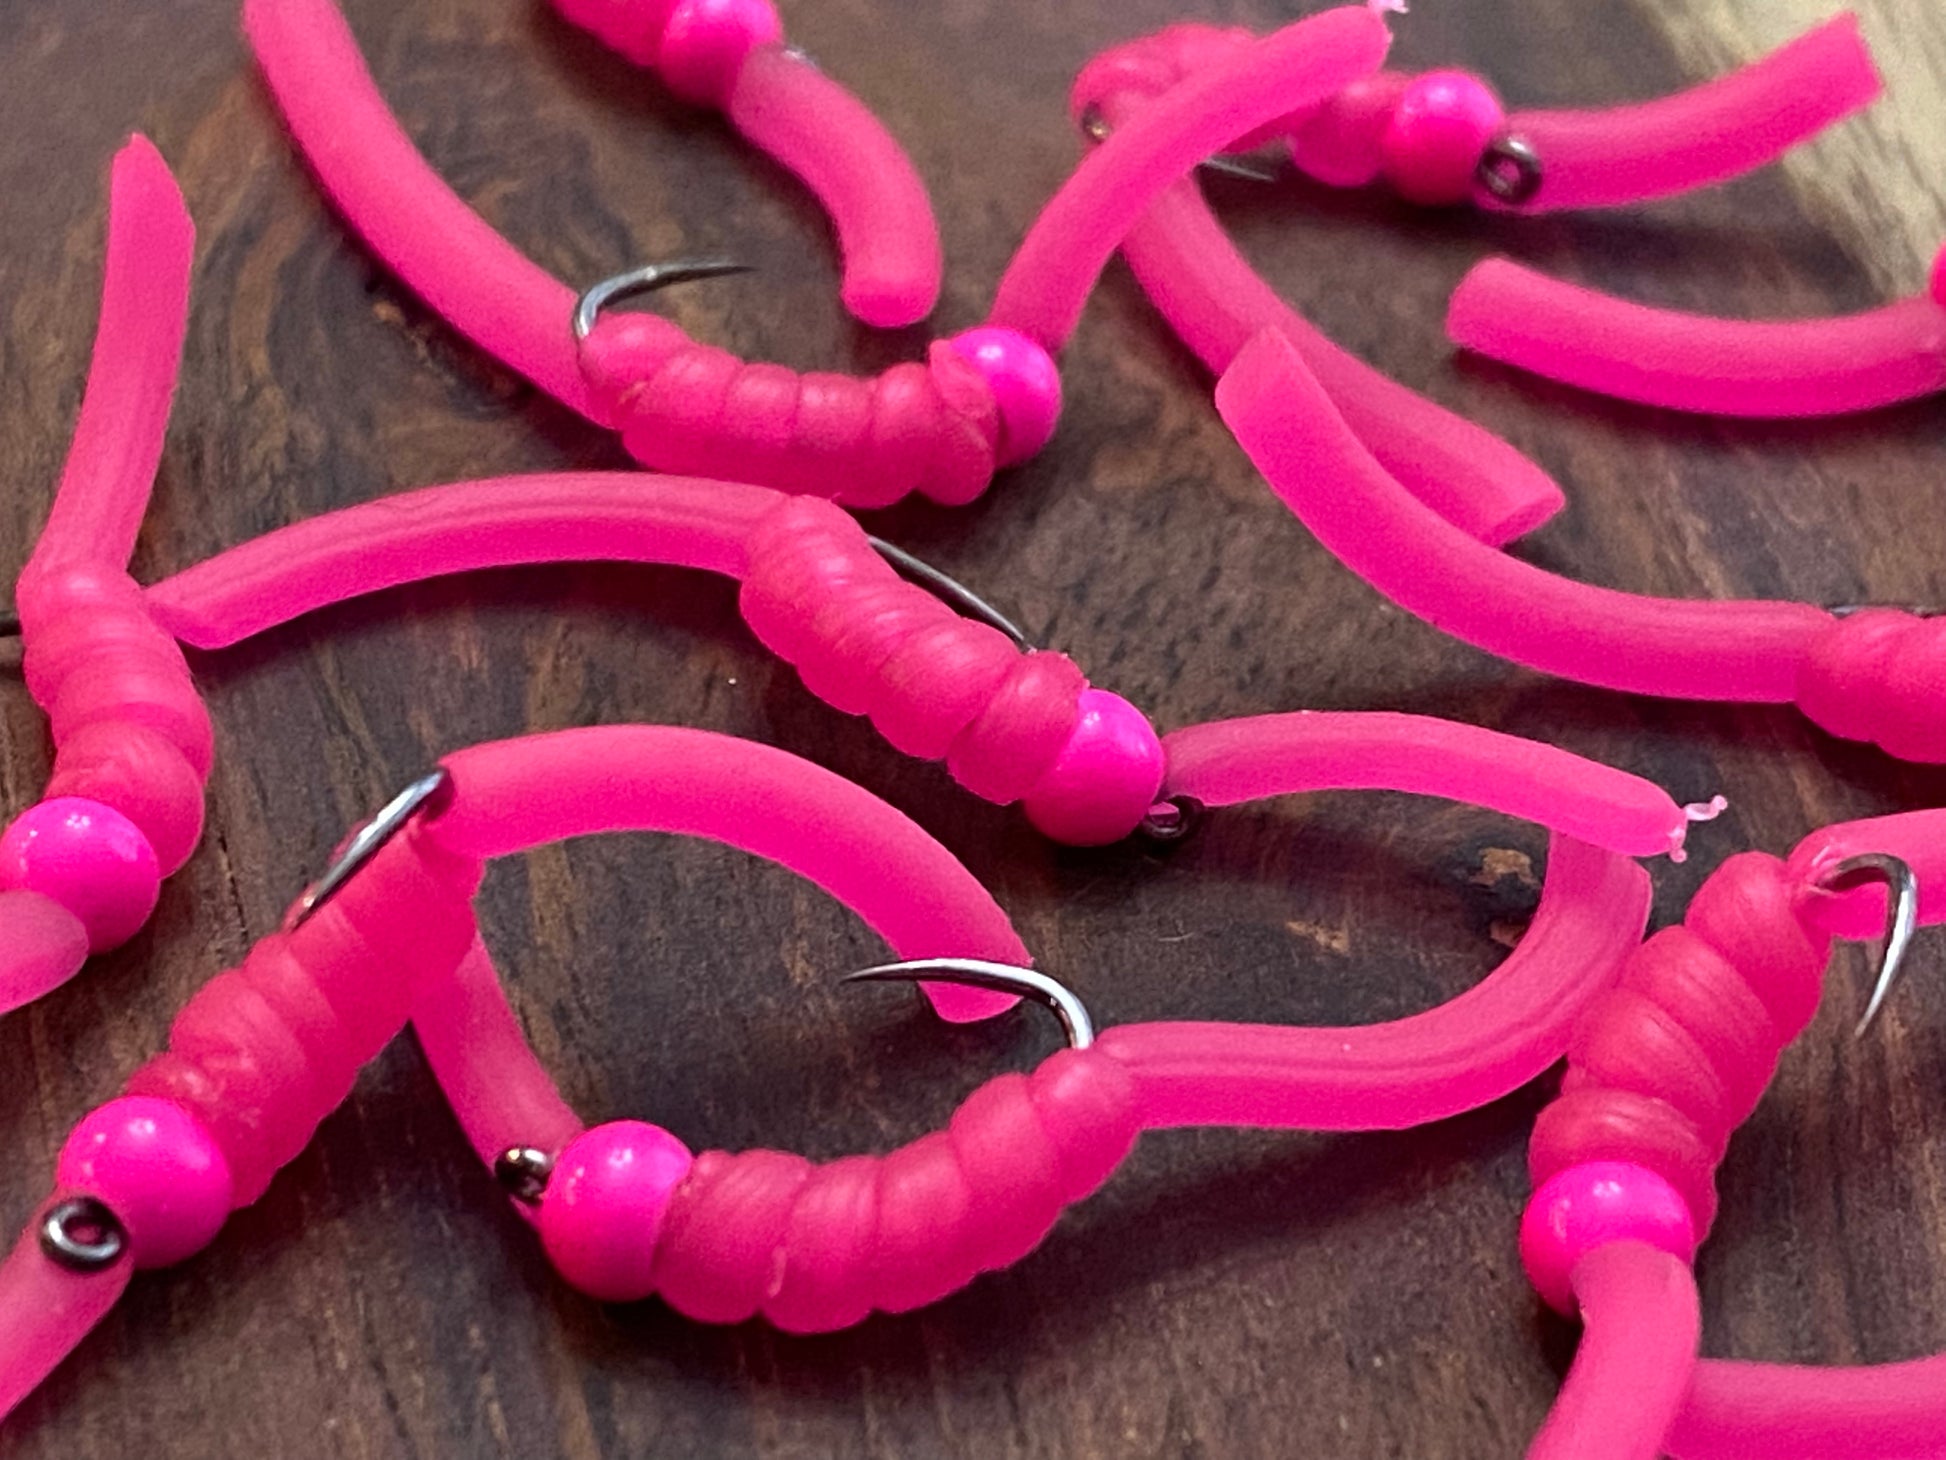 Pink squirmy worms